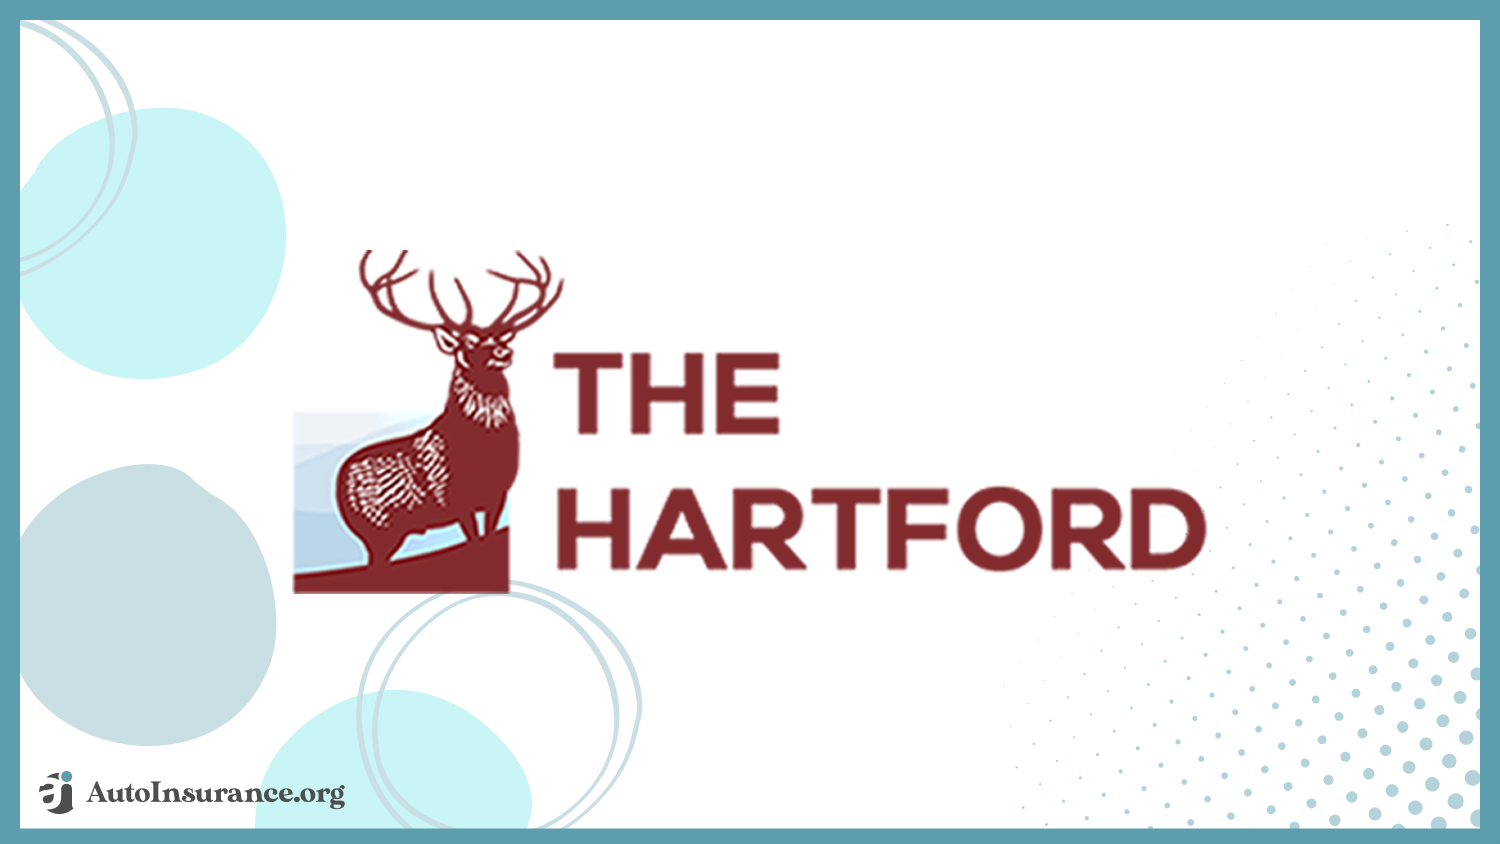 The Hartford: Best Auto Insurance for Drivers with Dementia